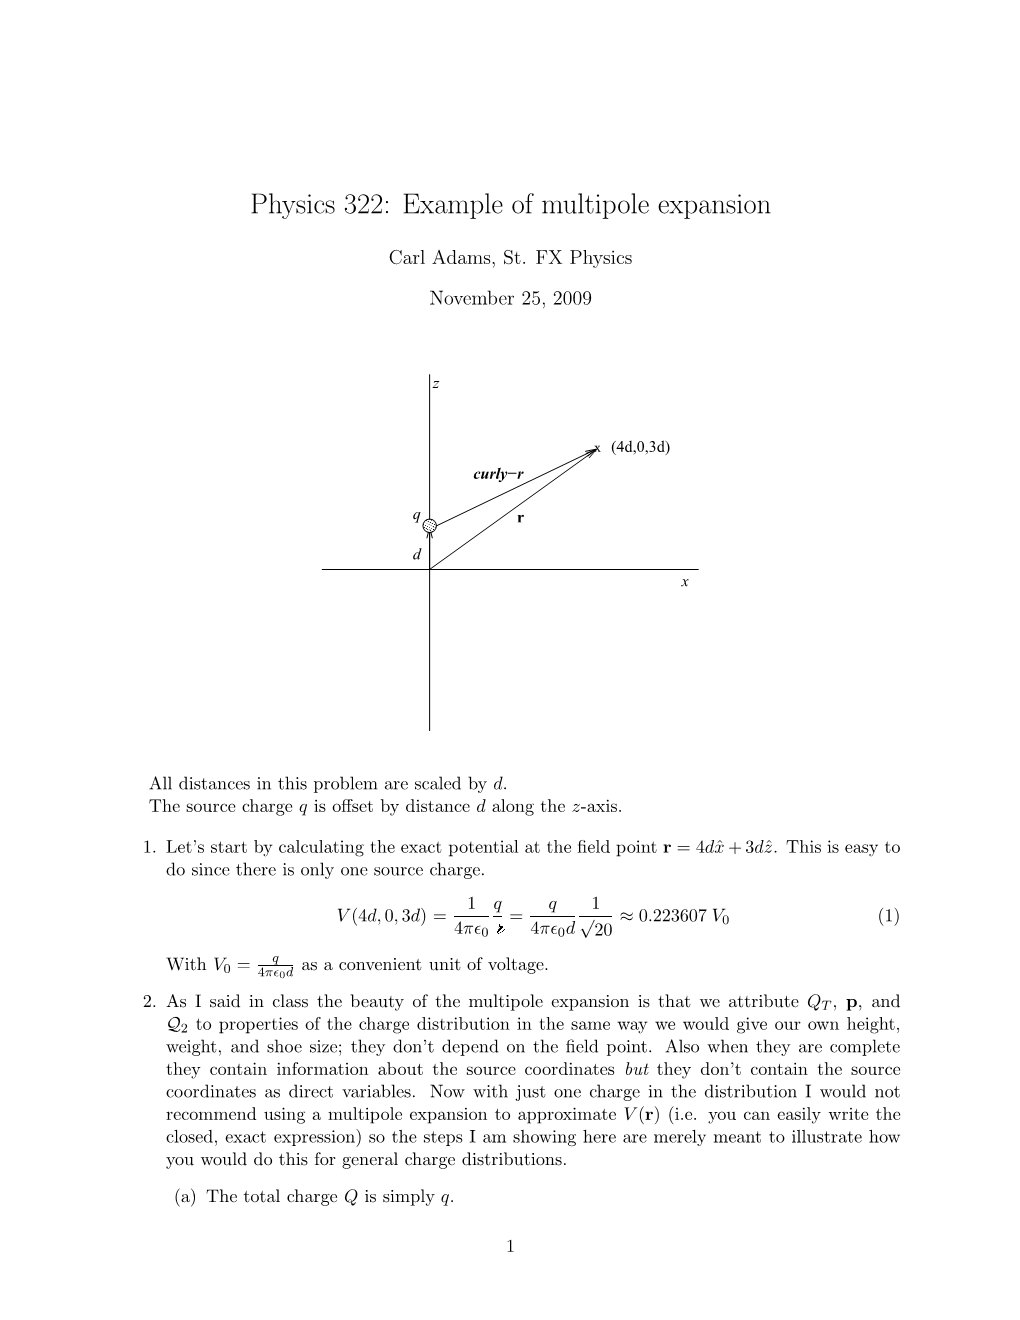 Physics 322: Example of Multipole Expansion